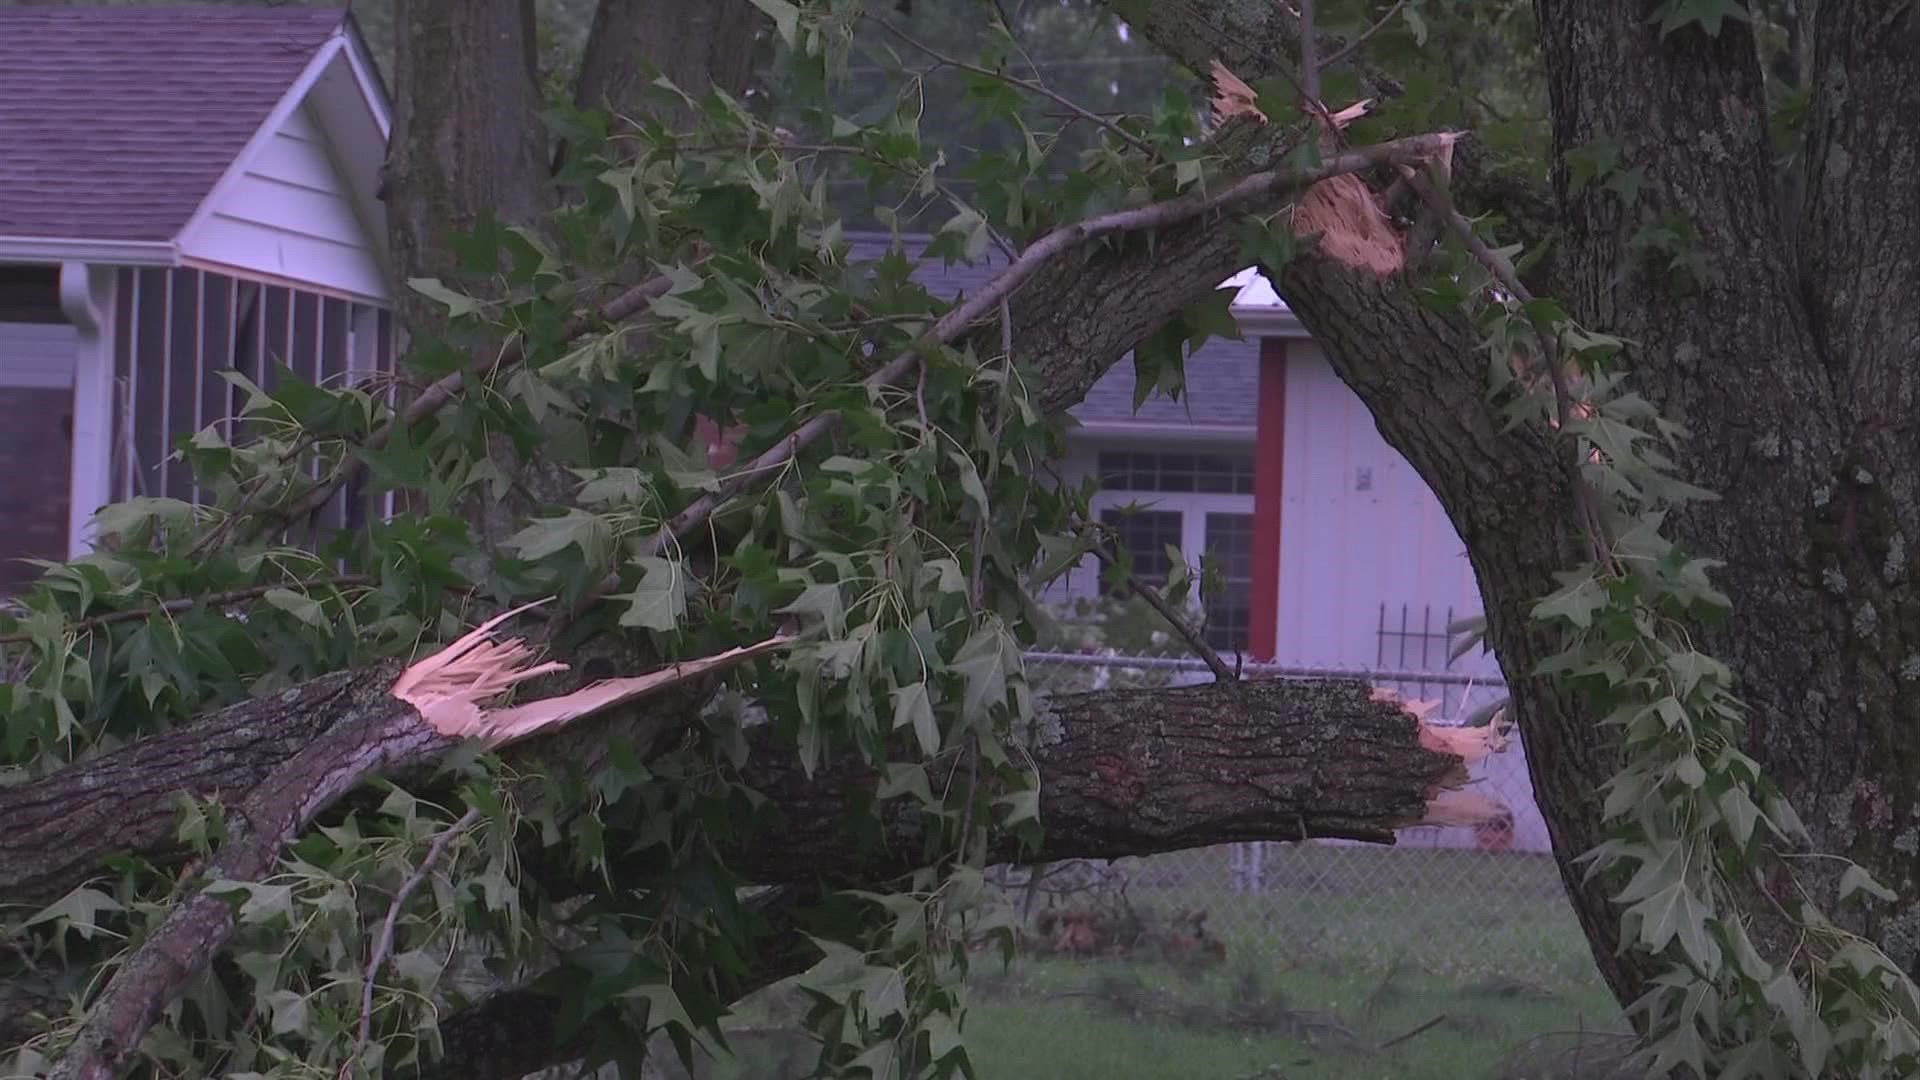 Strong storms moved through central Ohio on Sunday. The National Weather Service will conduct a storm survey Monday in Pickaway County and Fairfield County.